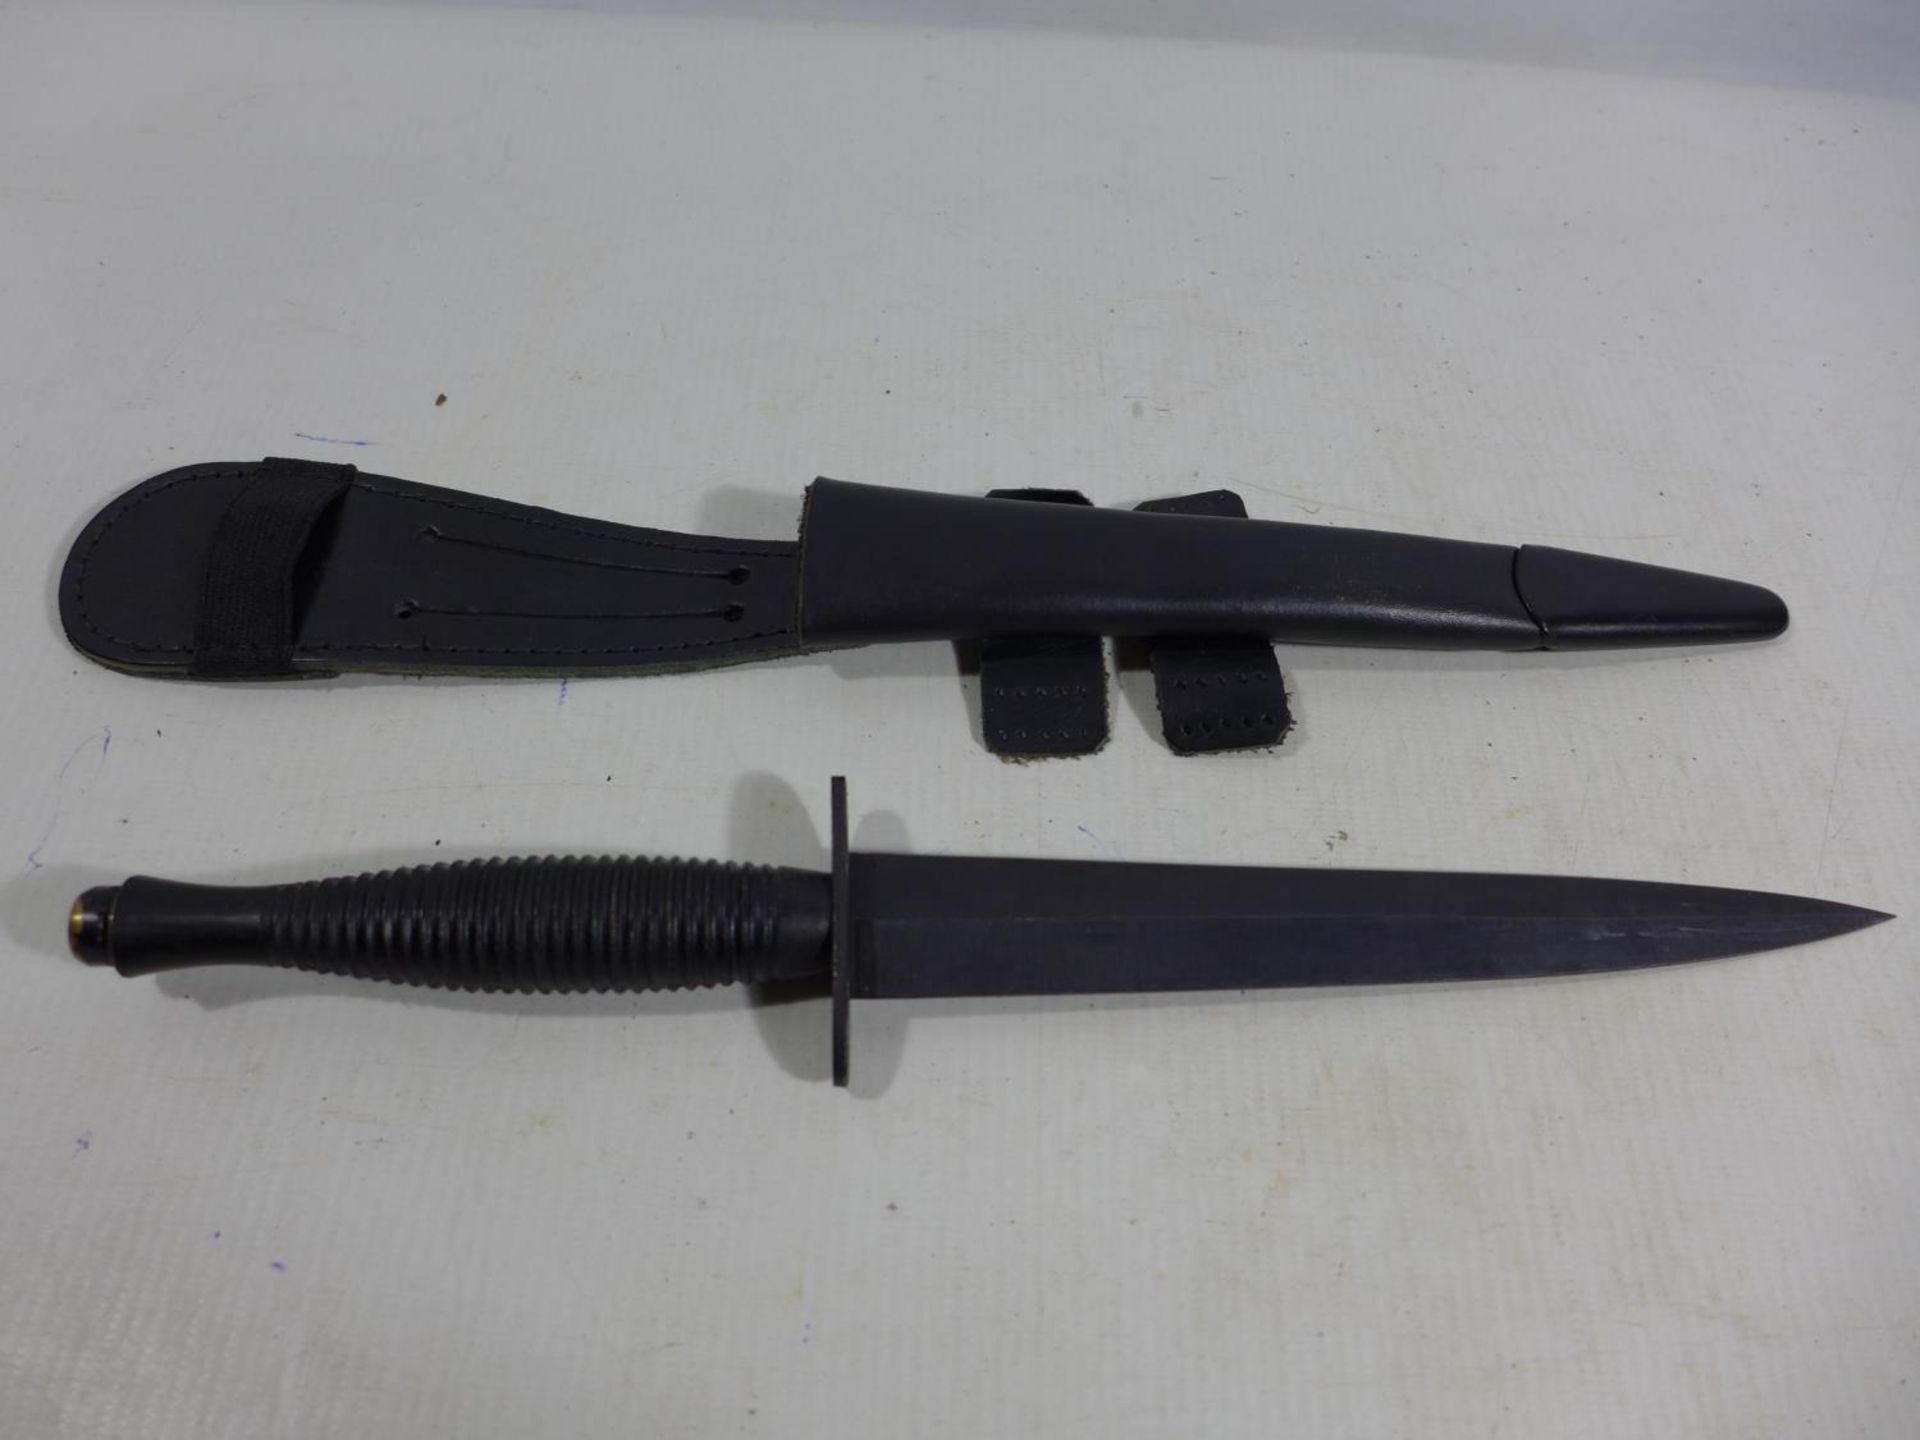 A FAIRBAIRN SYKES FIGHTING KNIFE AND SCABBARD, 18CM BLADE, CROSSGUARD MARKED WITH MILITARY BROAD